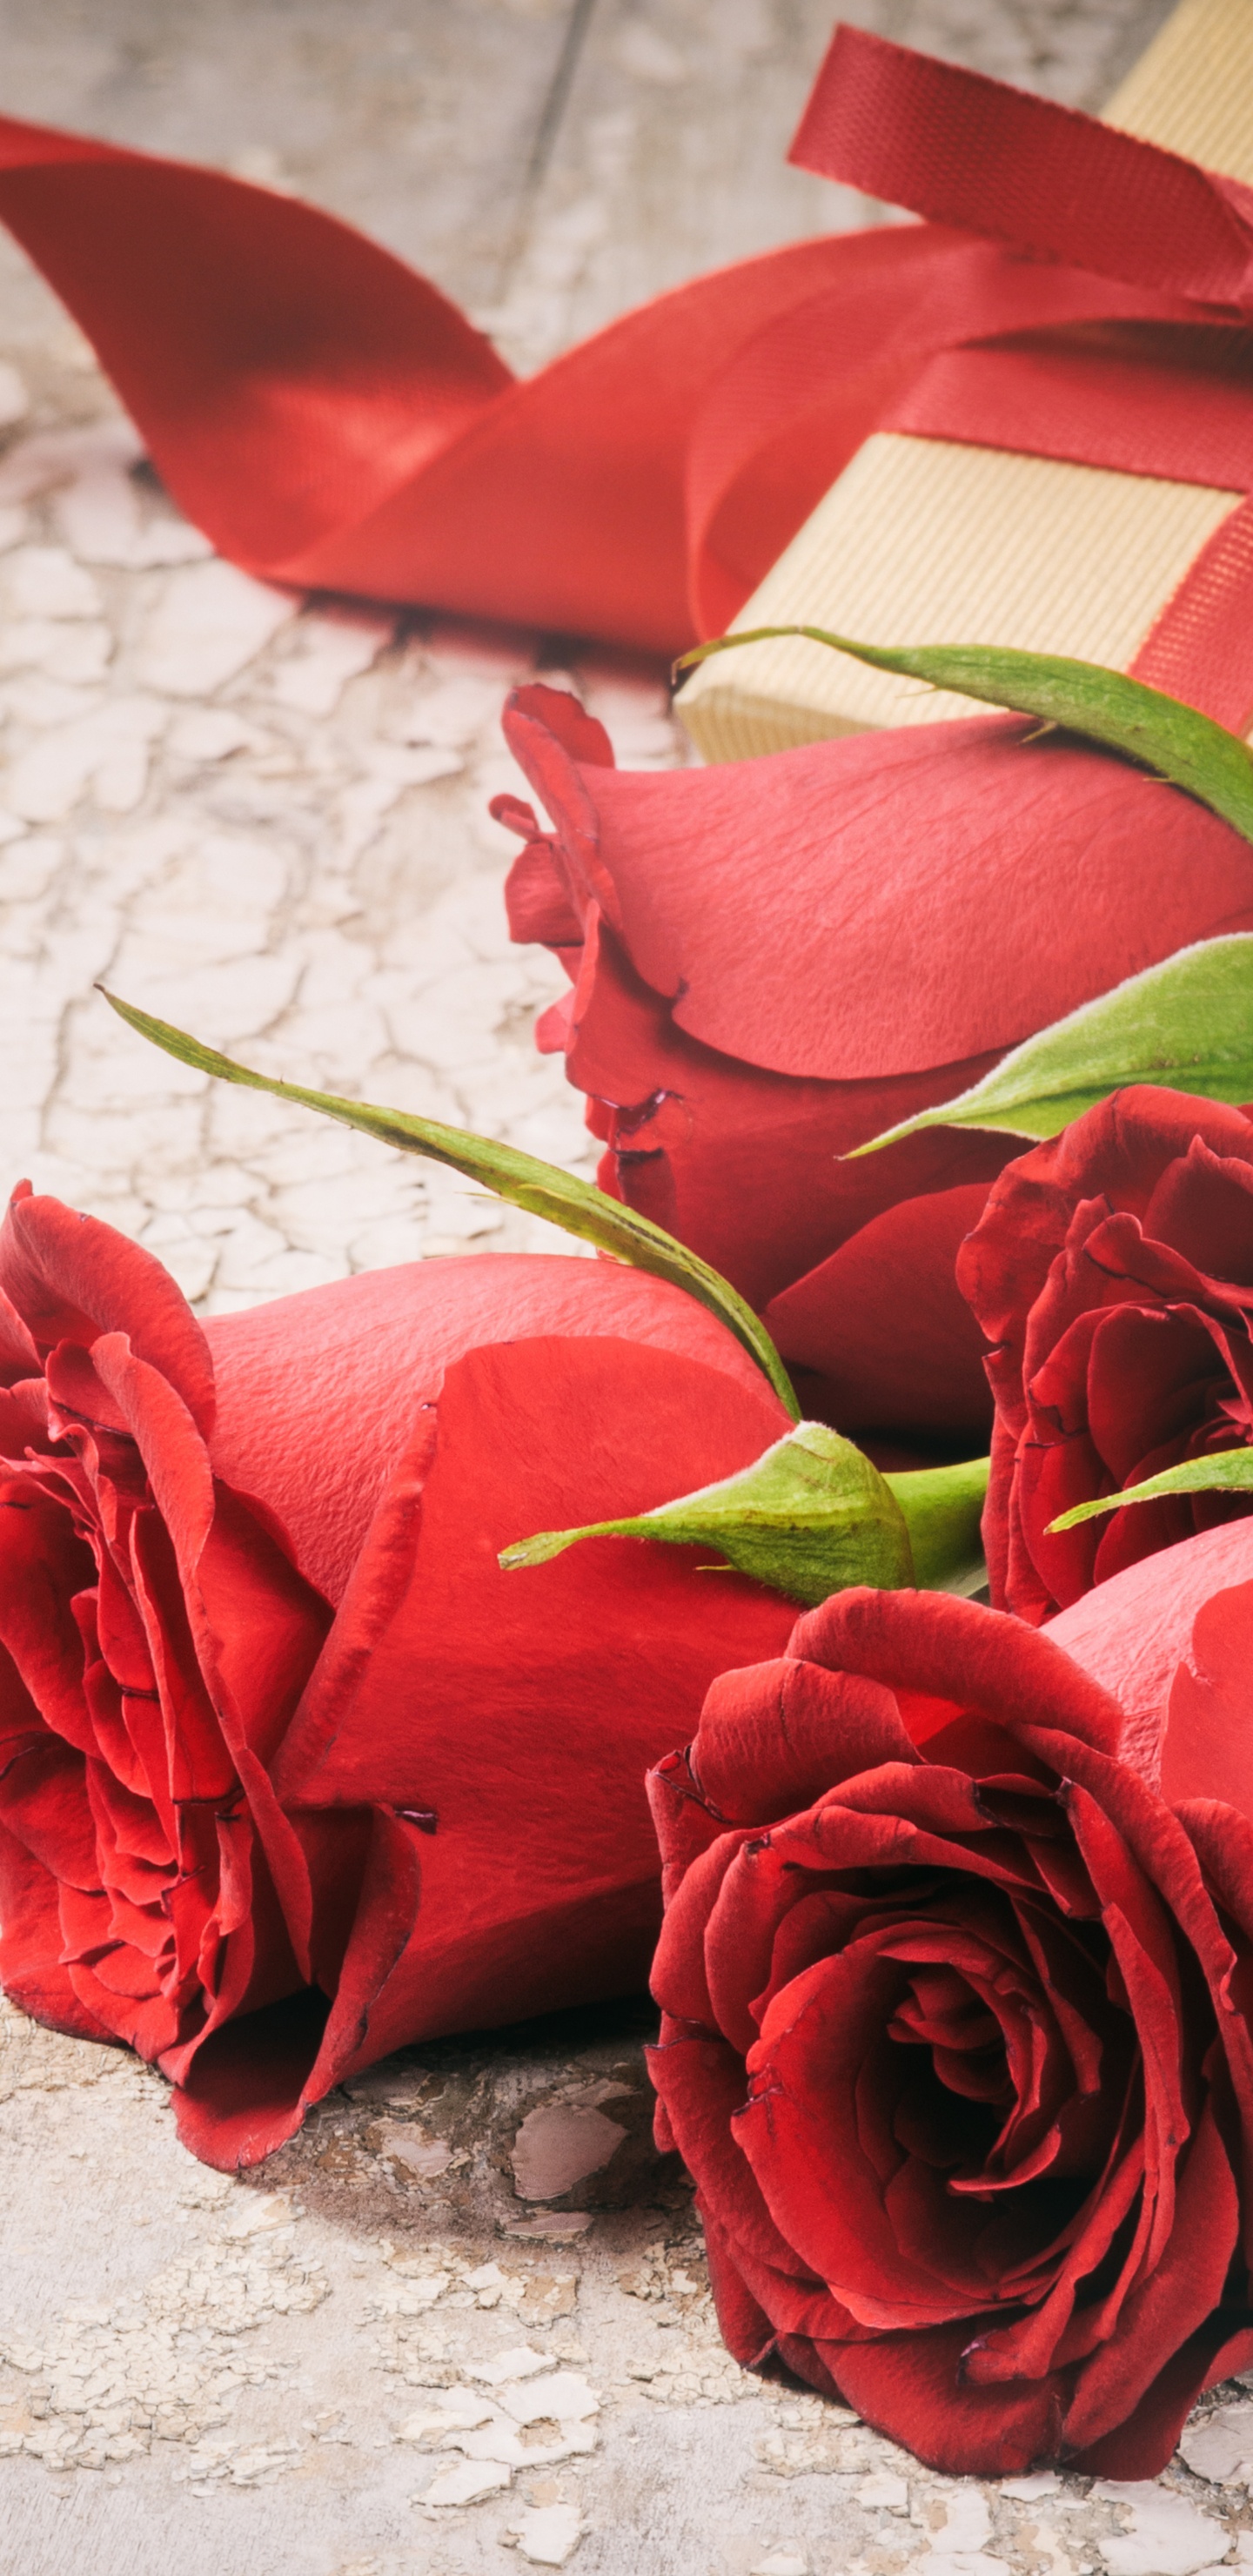 Roses Rouges Sur Textile Blanc. Wallpaper in 1440x2960 Resolution